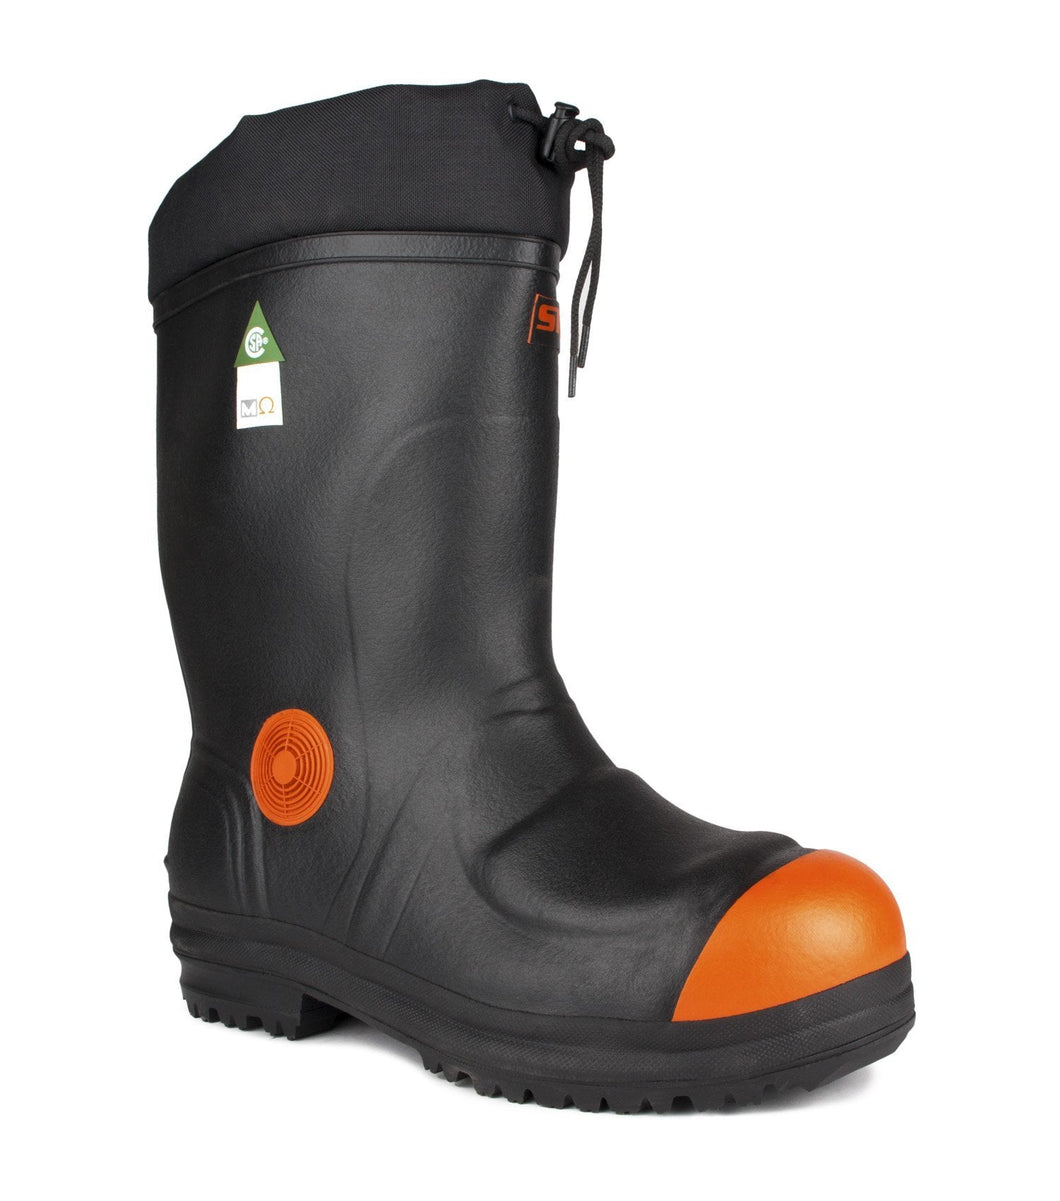 Rubber insulated boots - STC Beaufort - front - black and orange